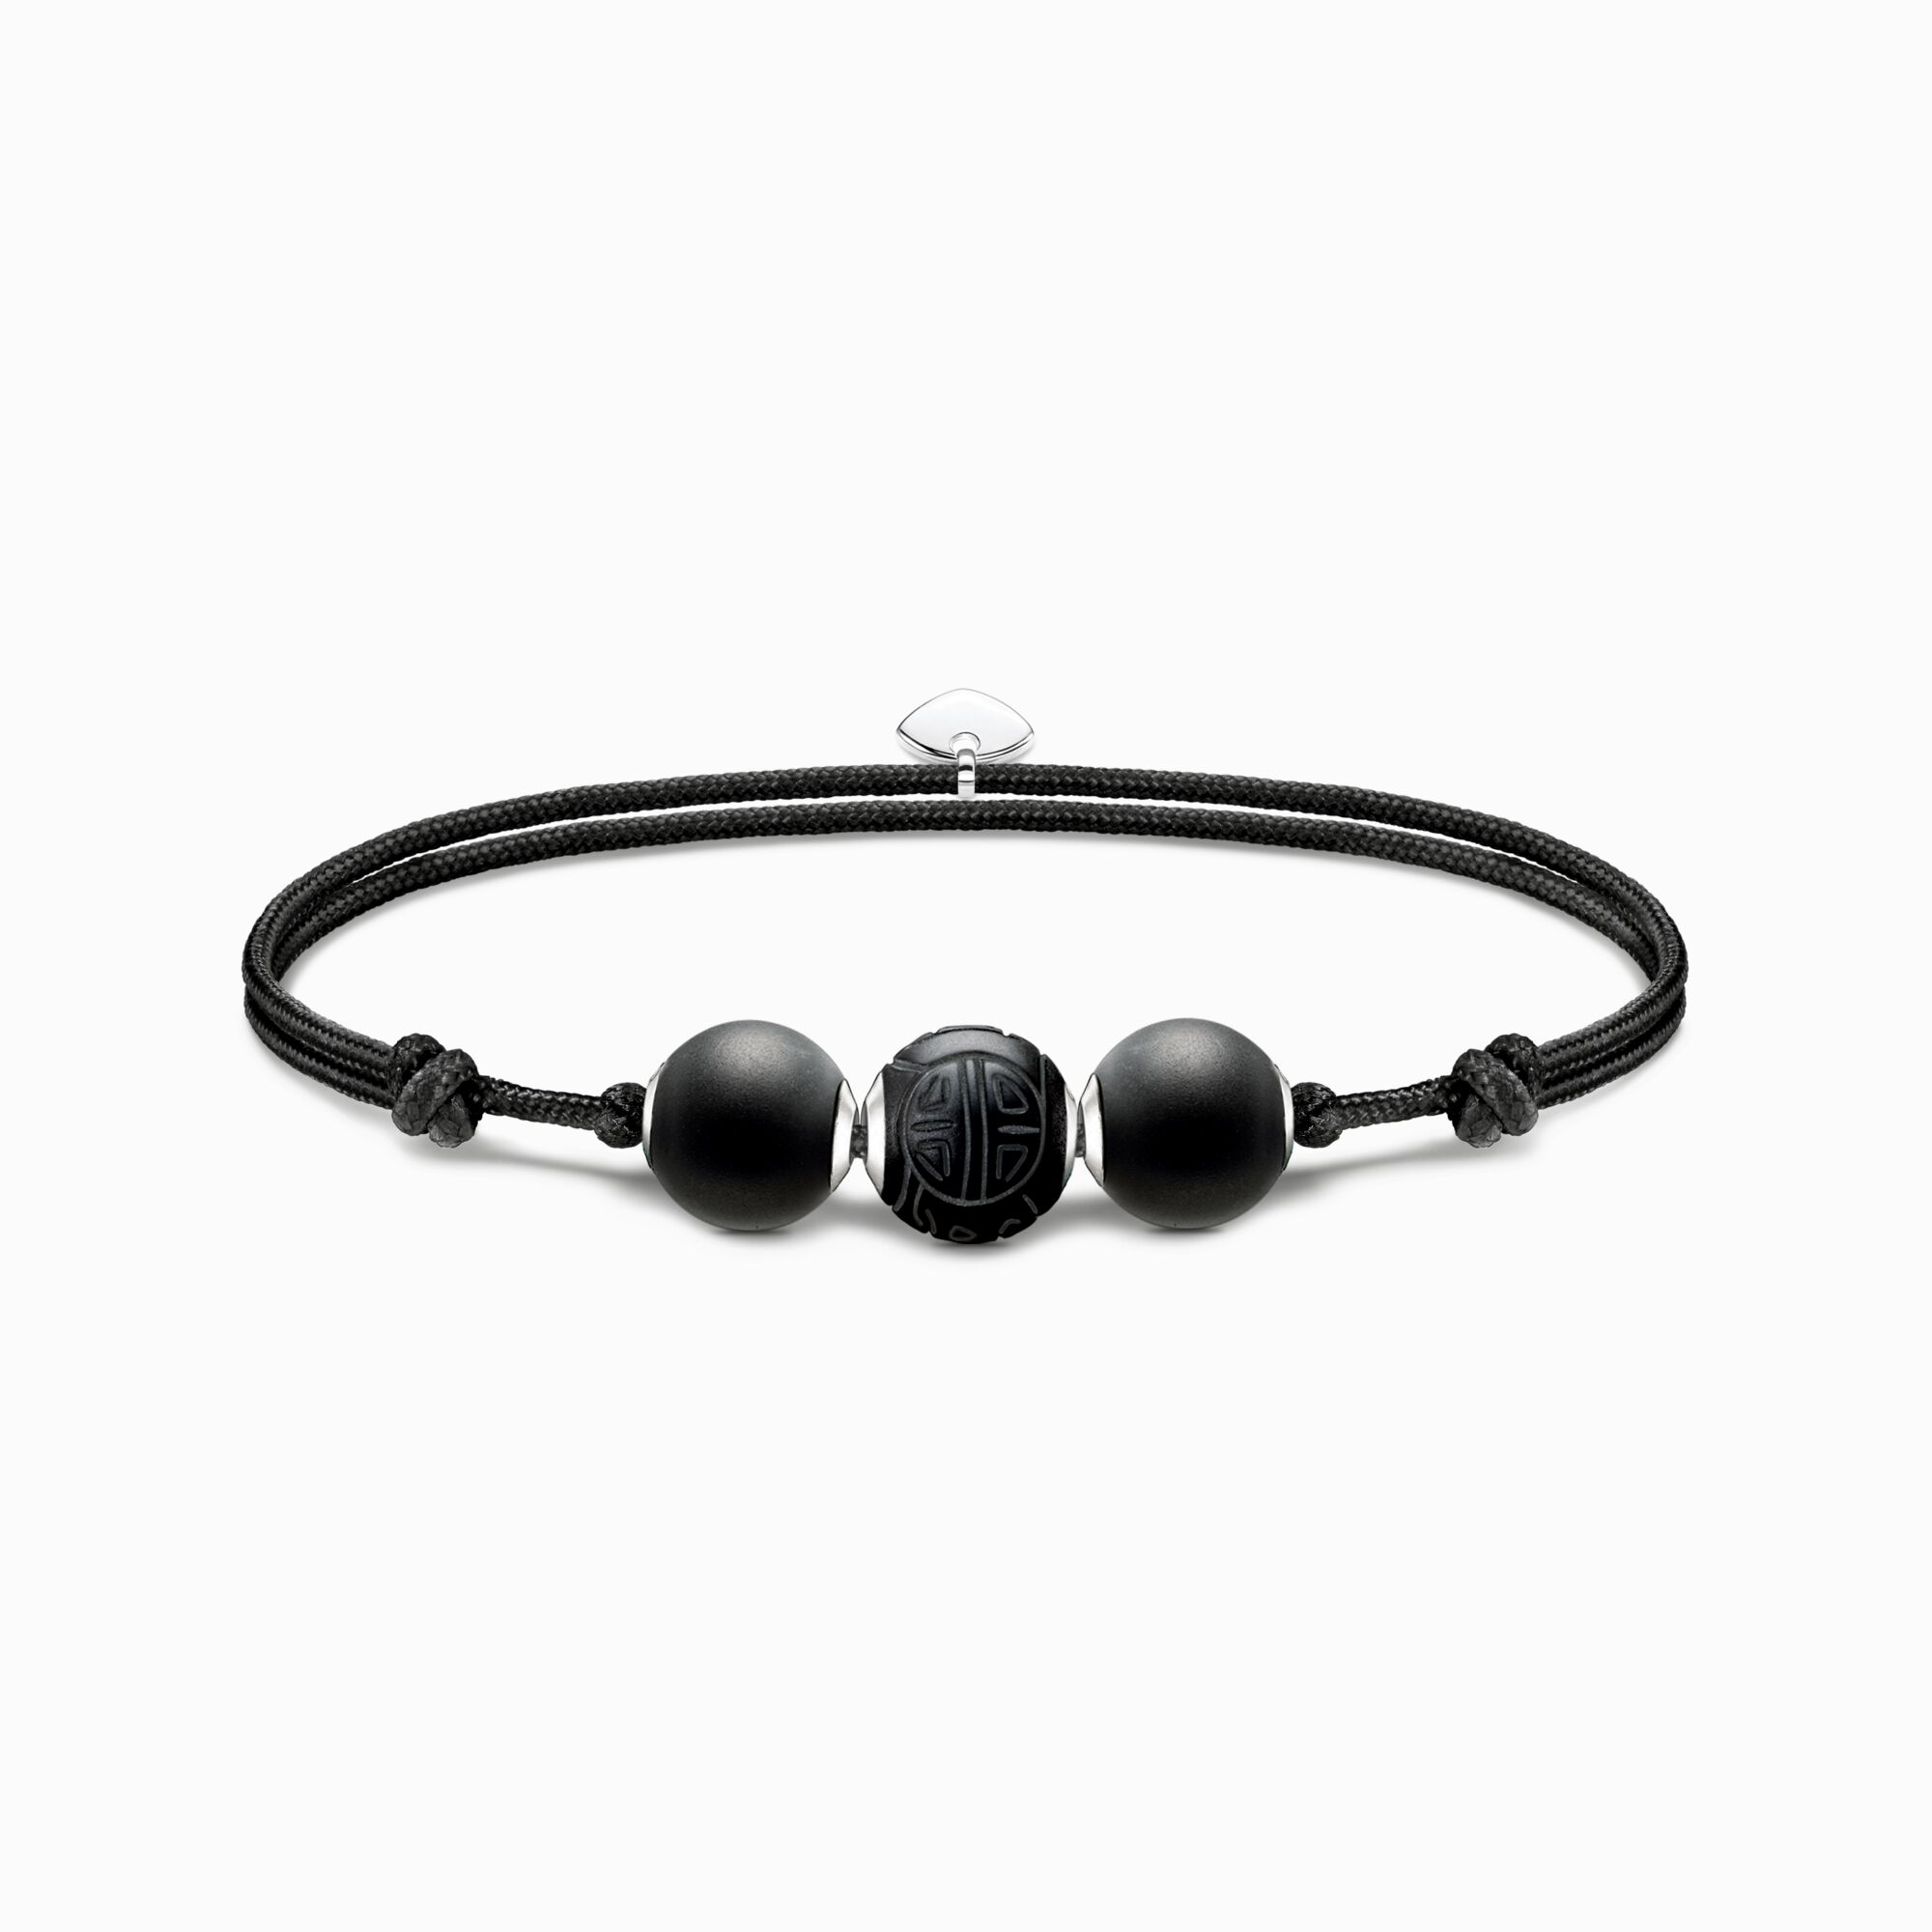 Bracelet Karma Secret with black obsidian Beads matt from the Karma Beads collection in the THOMAS SABO online store